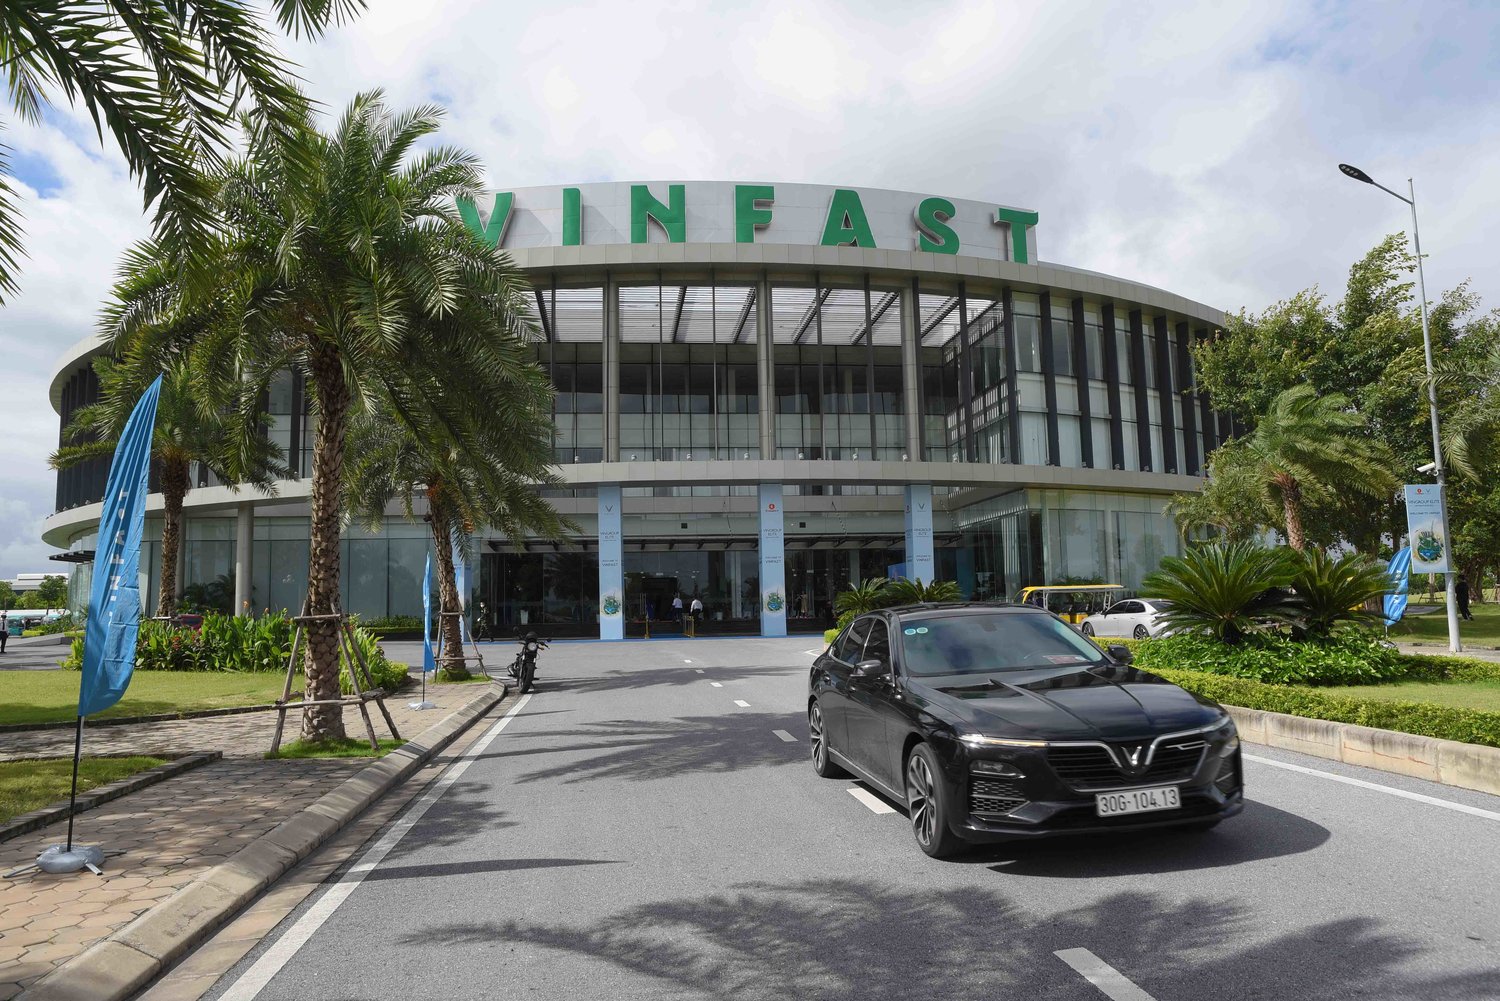 The VinFast manufacturing facility in Haiphong, Vietnam is more than 800 acres. The site being built in Moncure is more than twice that size at 1,765 acres, according to the land deed signed Wednesday